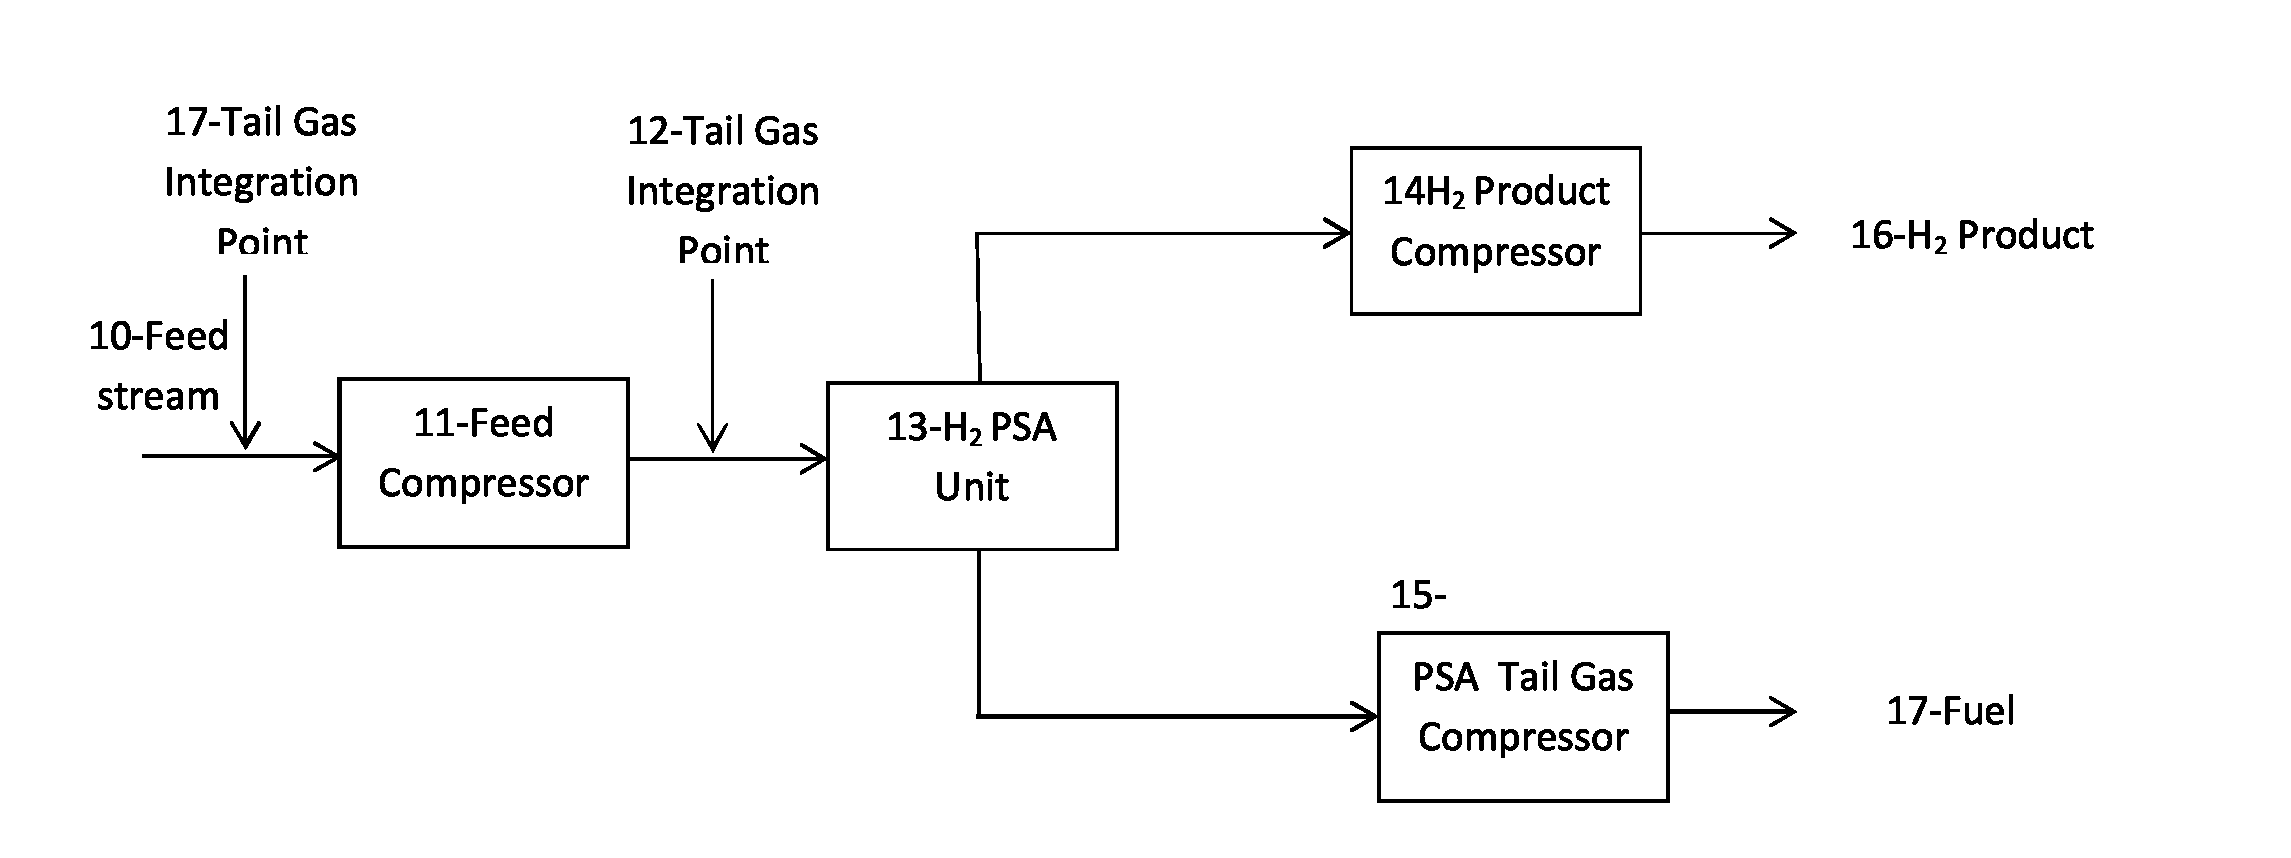 Integration of plasma and hydrogen process with combined cycle power plant, simple cycle power plant and steam reformers